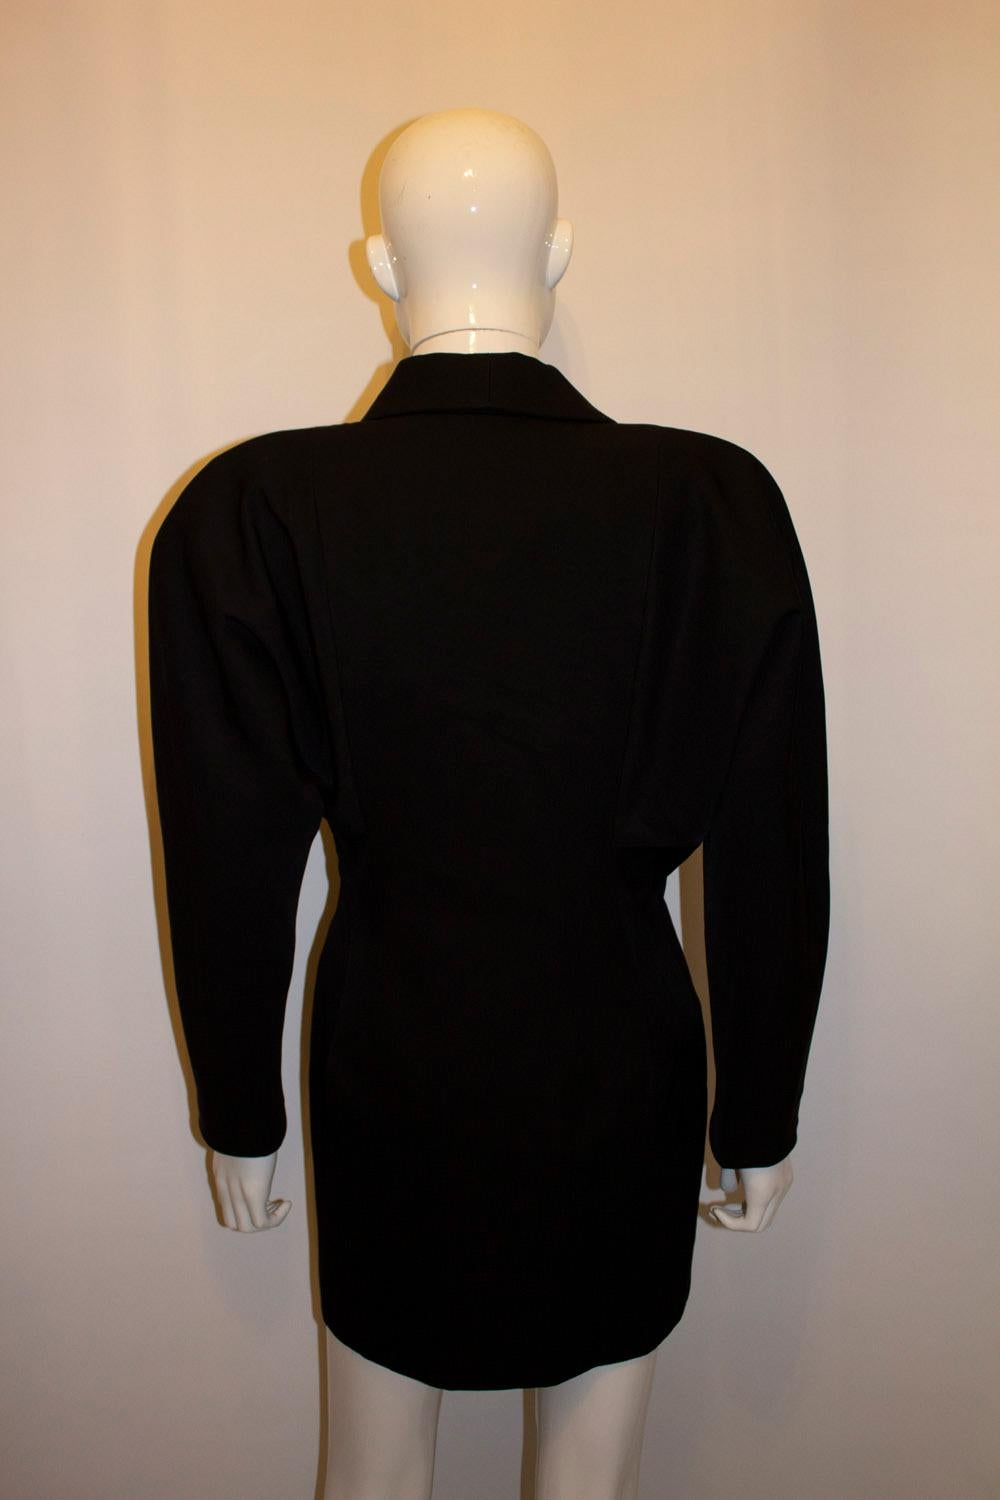 A chic vintage coat dress by Zandra Rhodes  with wonderful tailoring. The Zandra Rhodes 11 dress has a three button fastening  at the front with wonderful buttons, shoulders pads and attractive lining. 100 % wool. Size 10 Bust 35'', waist 28'' ,